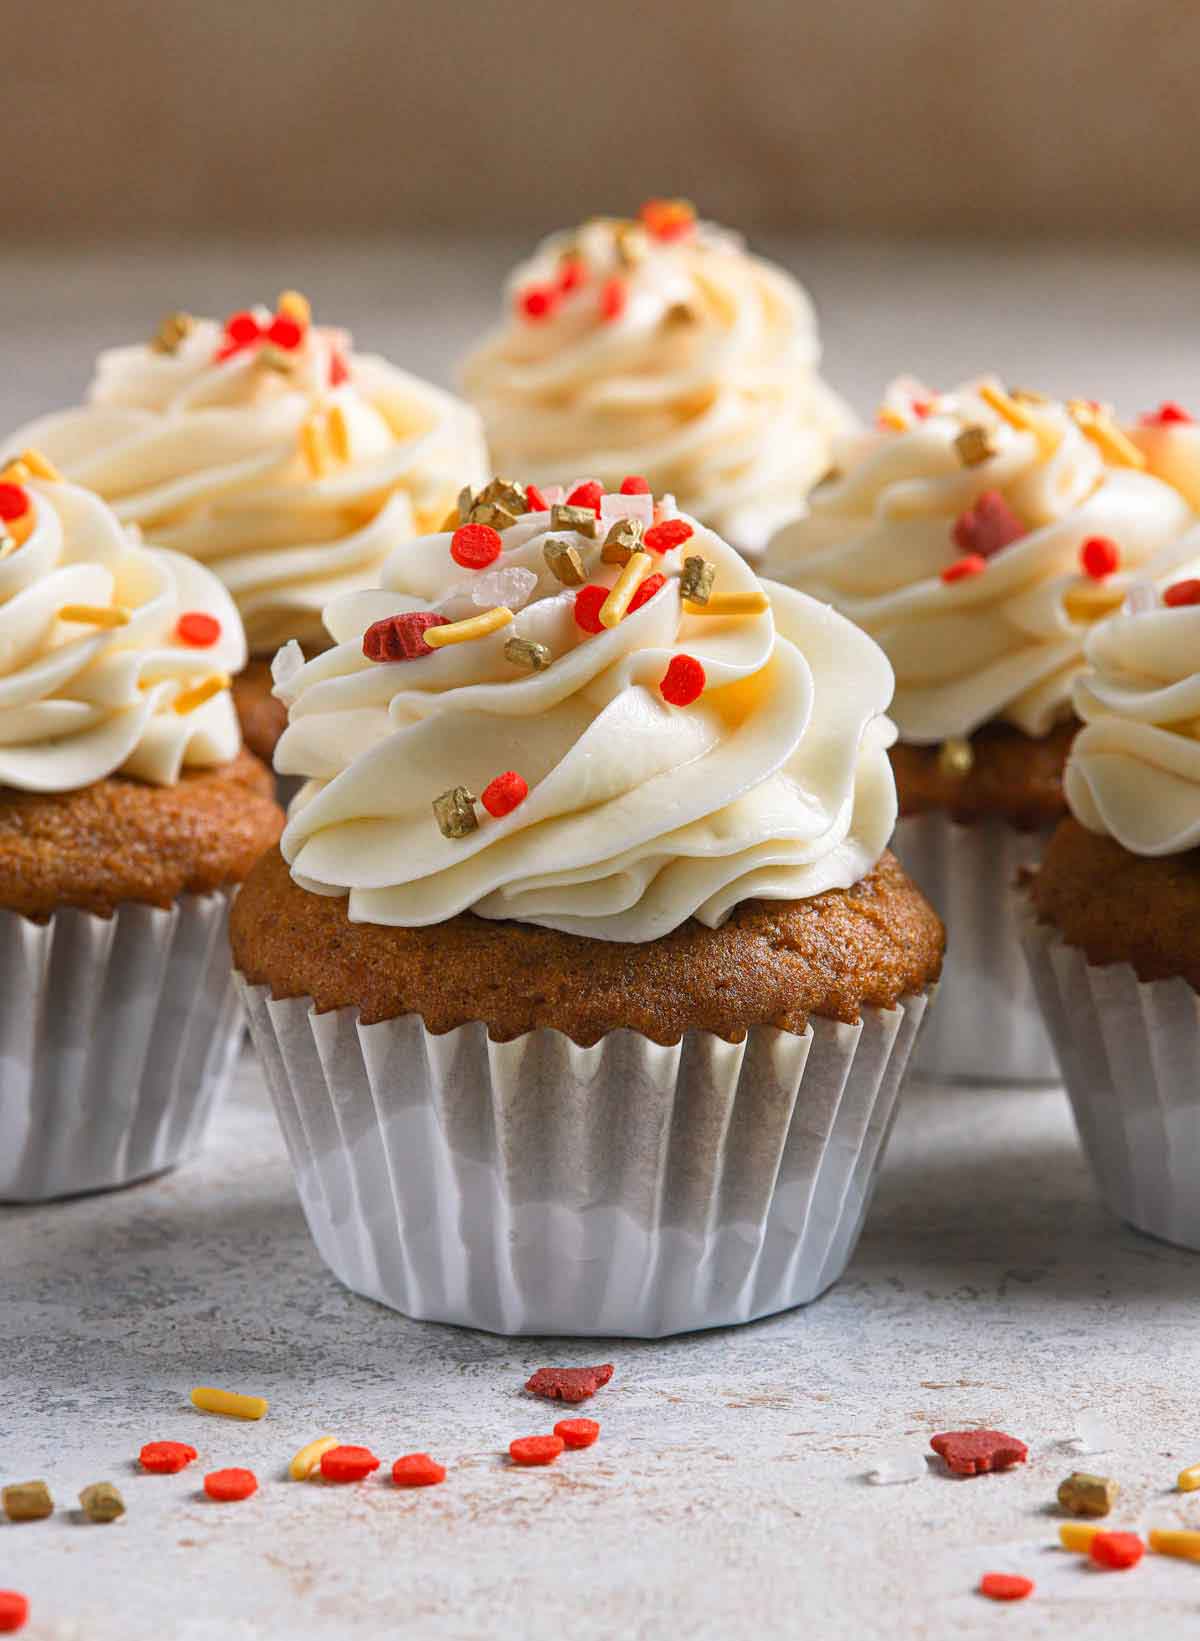 Pumpkin cupcakes in white liners topped with cream cheese frosting and fall-themed sprinkles.